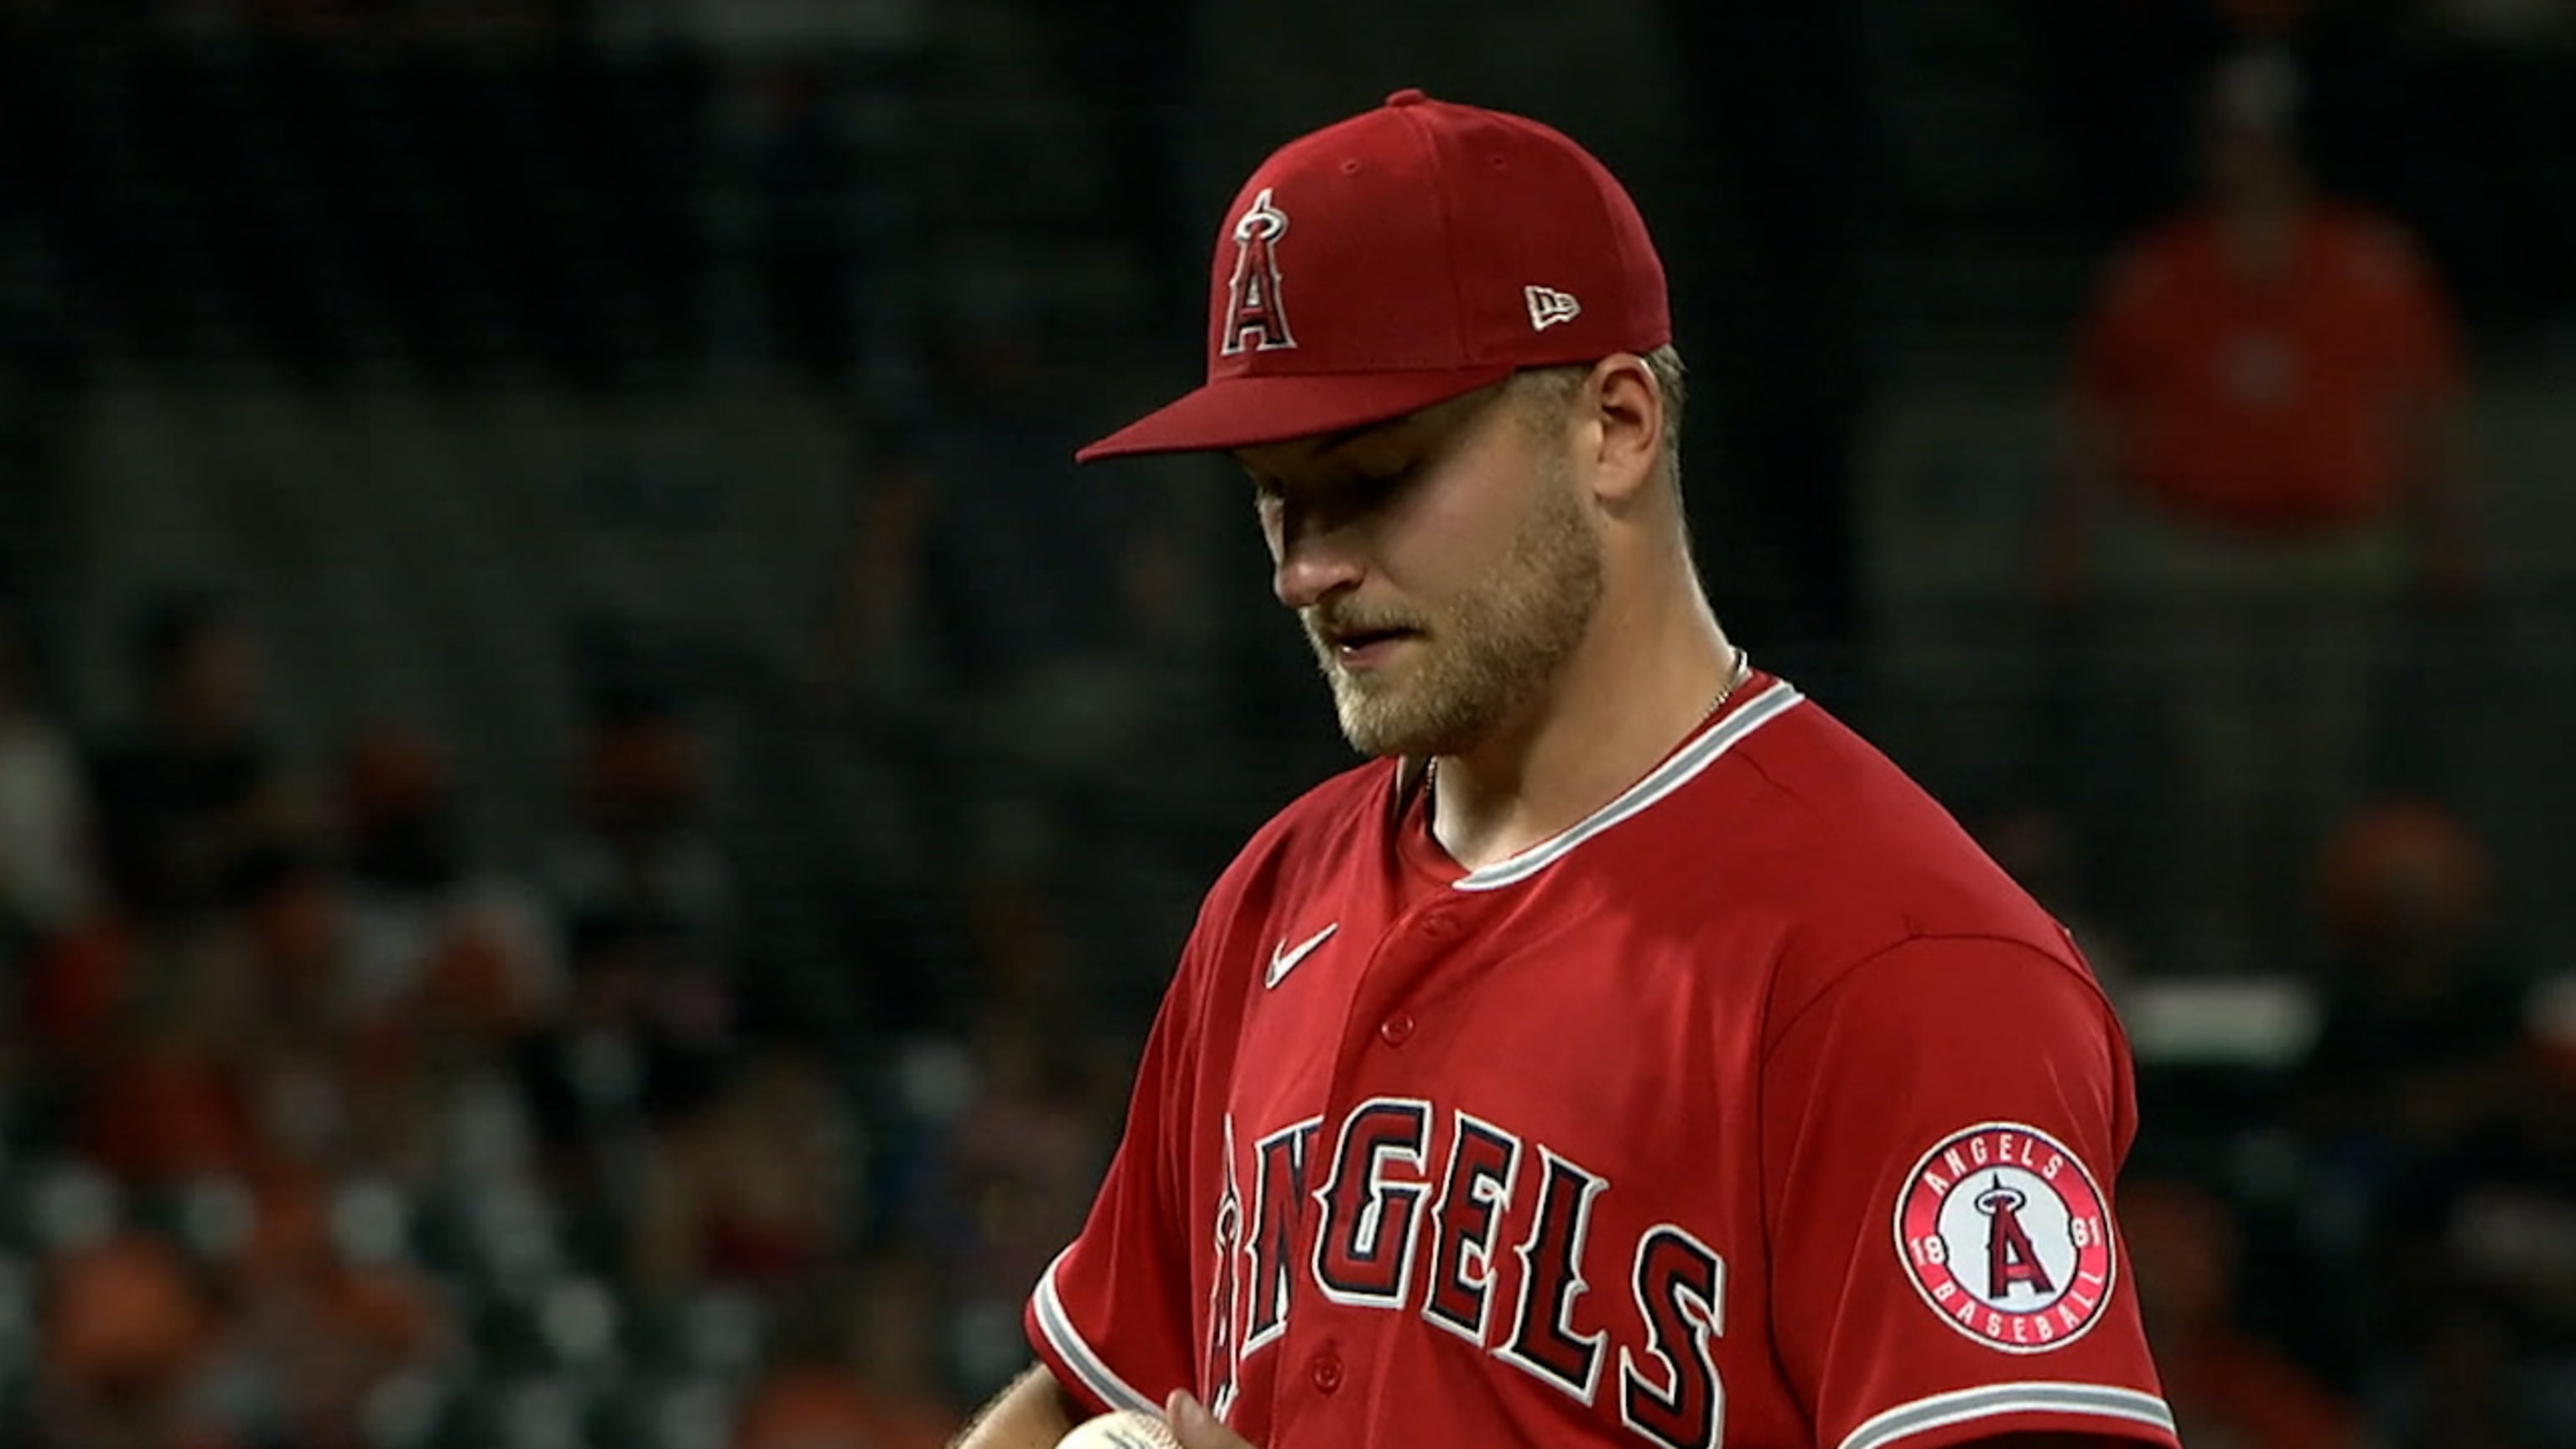 Trout and Shohei to? #mlb #baseball #miketrout #shoheiohtani #oh